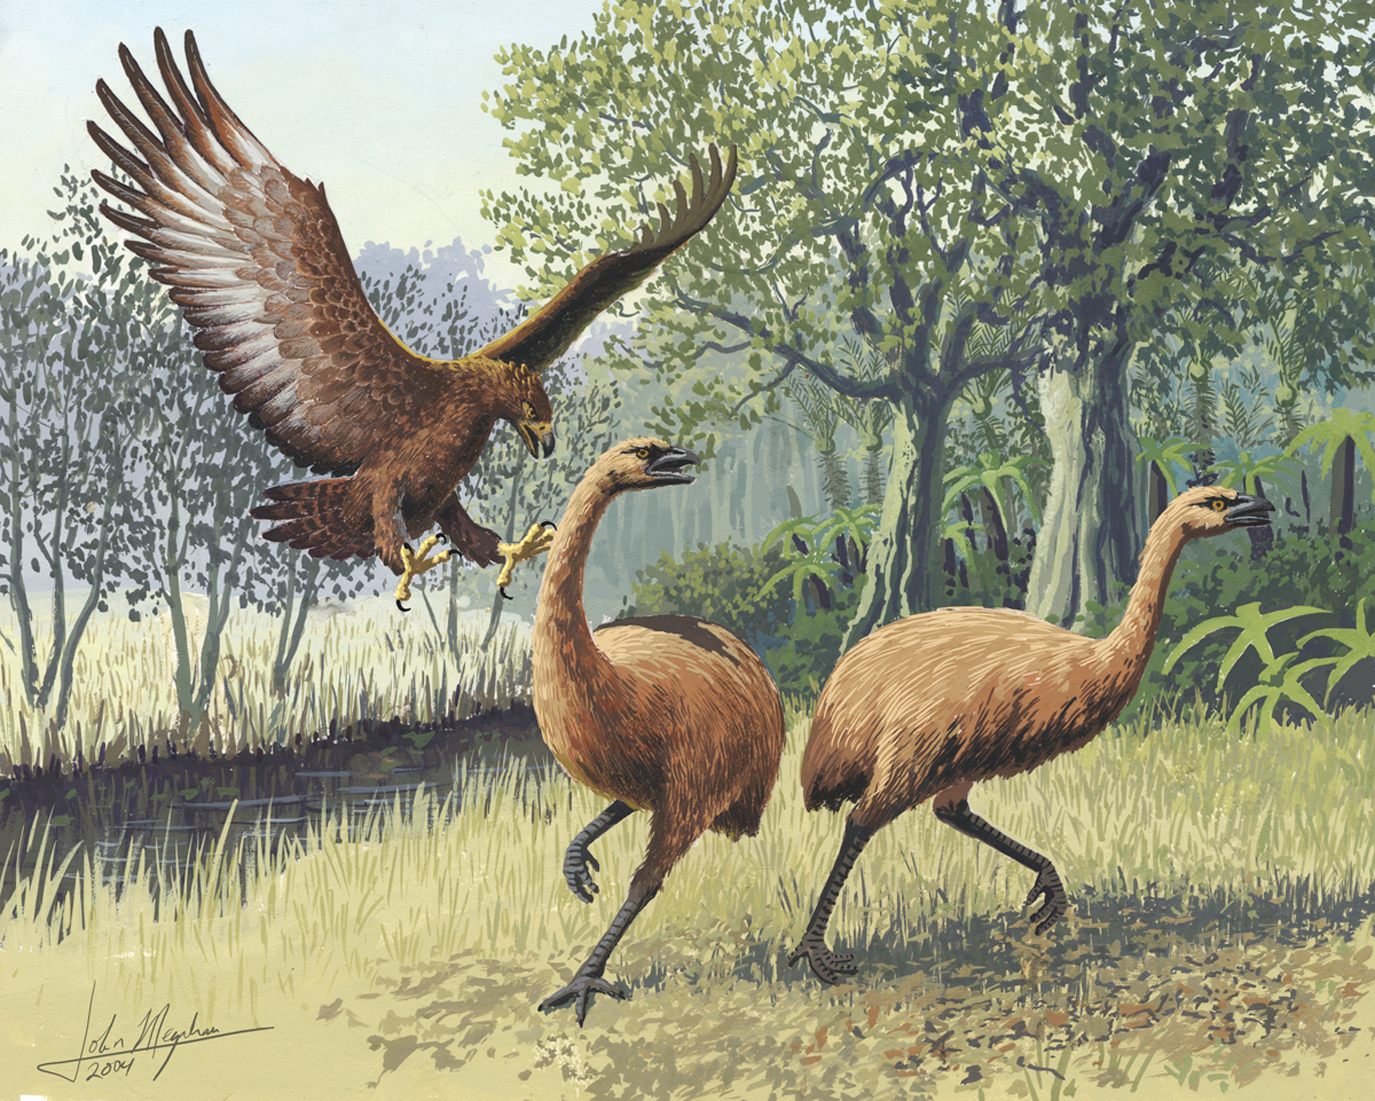 When the Māori First Settled New Zealand, They Hunted Flightless, 500-Pound  Birds - Gastro Obscura